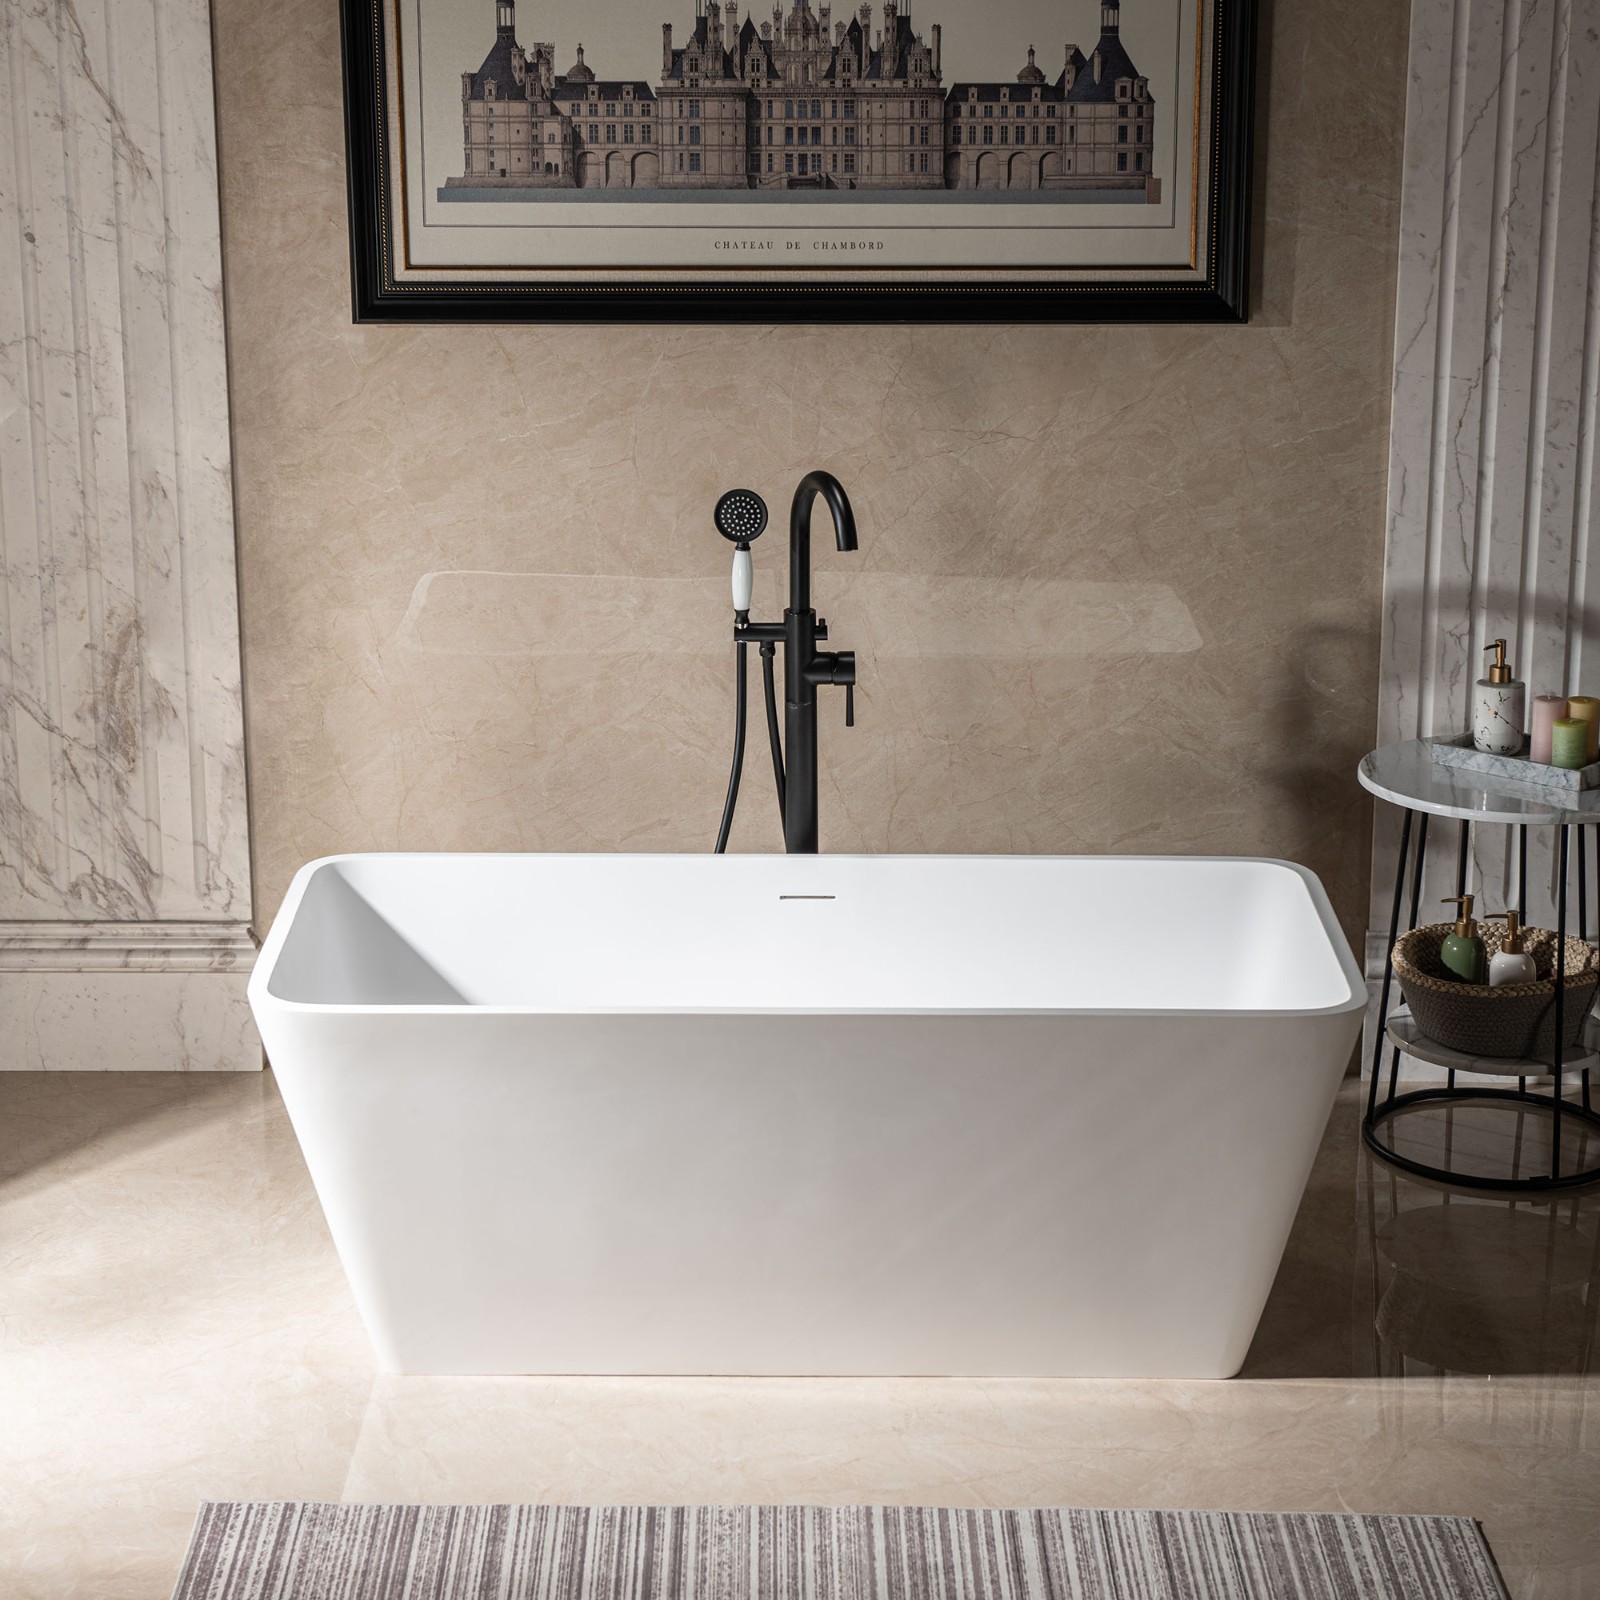  WOODBRIDGE 59 in. x 27.5 in. Luxury Contemporary Solid Surface Freestanding Bathtub in Matte White_19